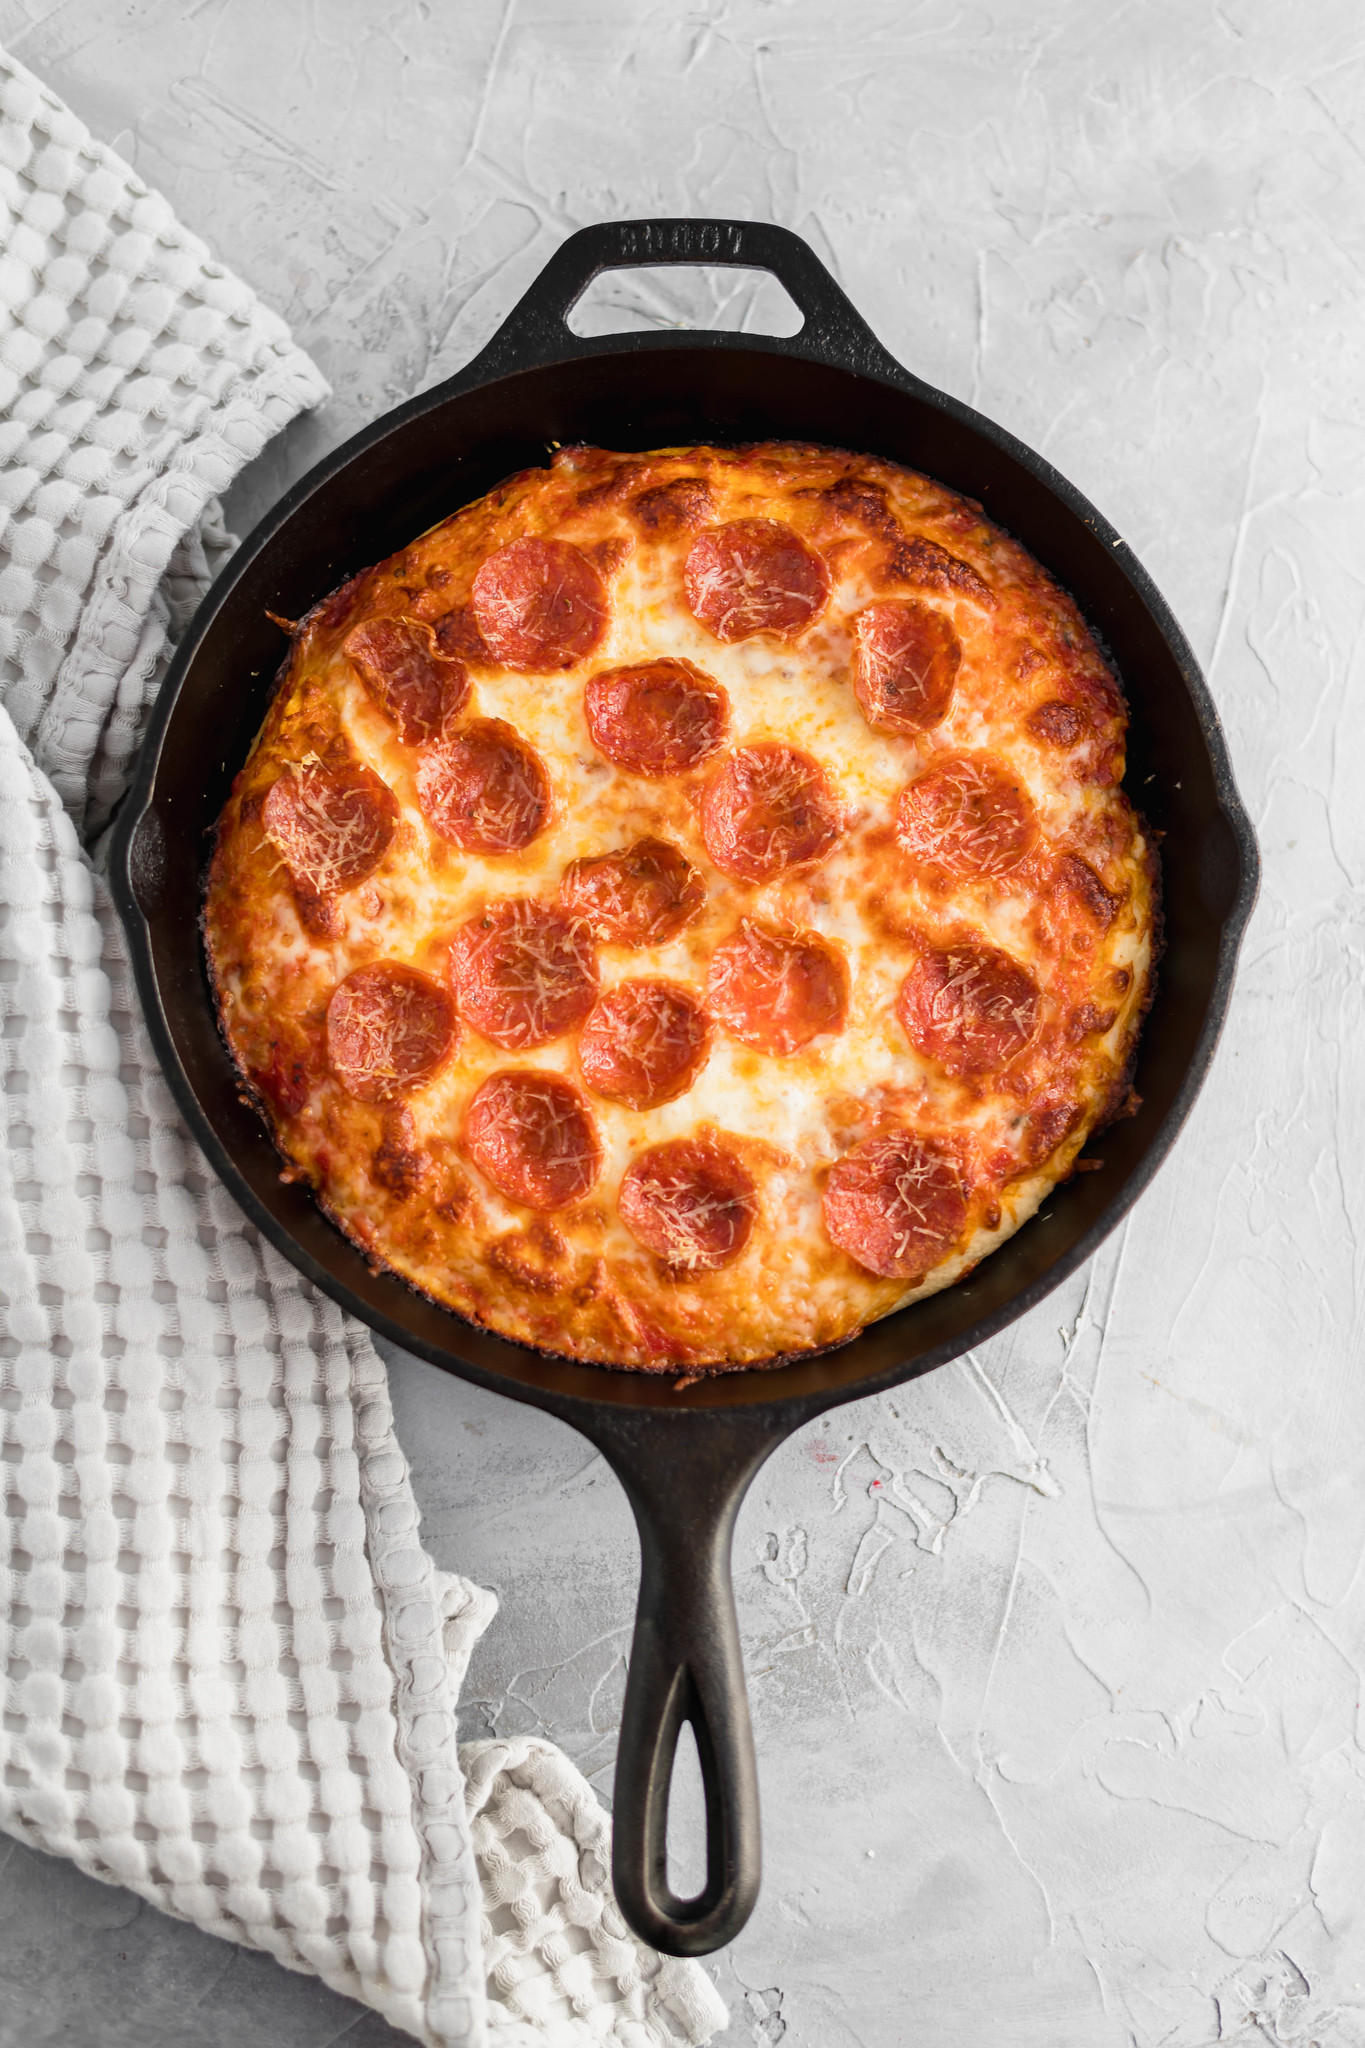 Movie night just got a whole lot better with this Cast Iron Skillet Pizza. It has the perfect crispy bottom and is topped with your favorite pizza toppings.